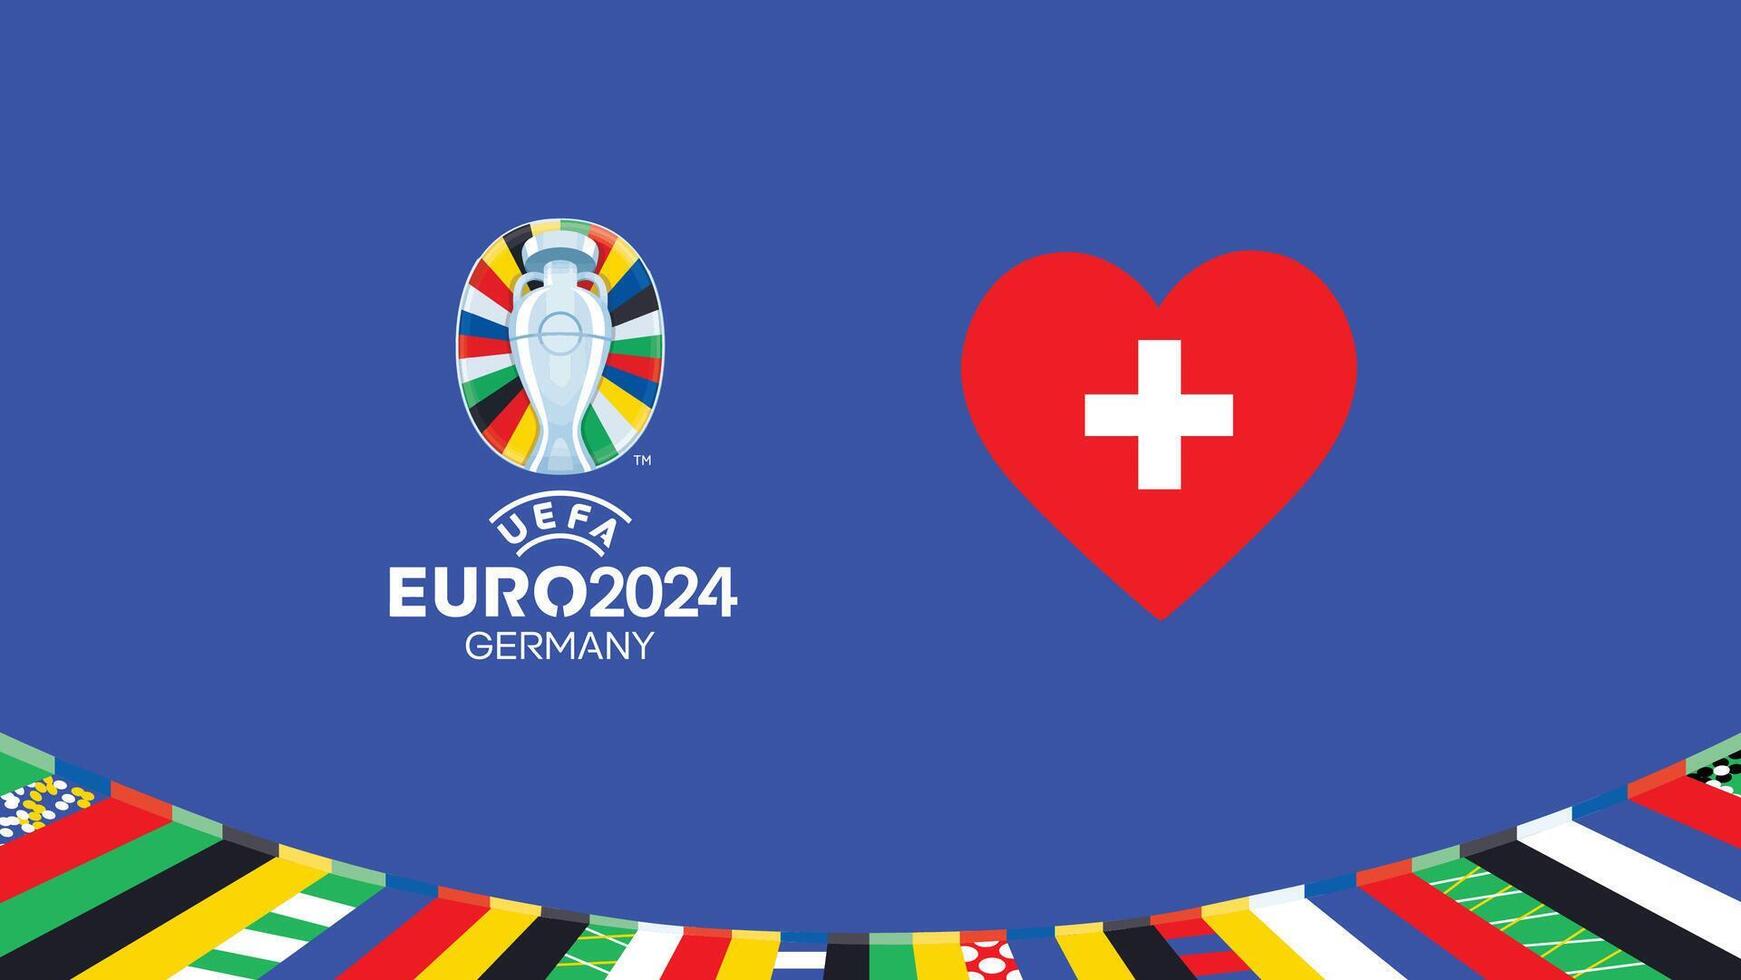 Euro 2024 Switzerland Flag Heart Teams Design With Official Symbol Logo Abstract Countries European Football Illustration vector